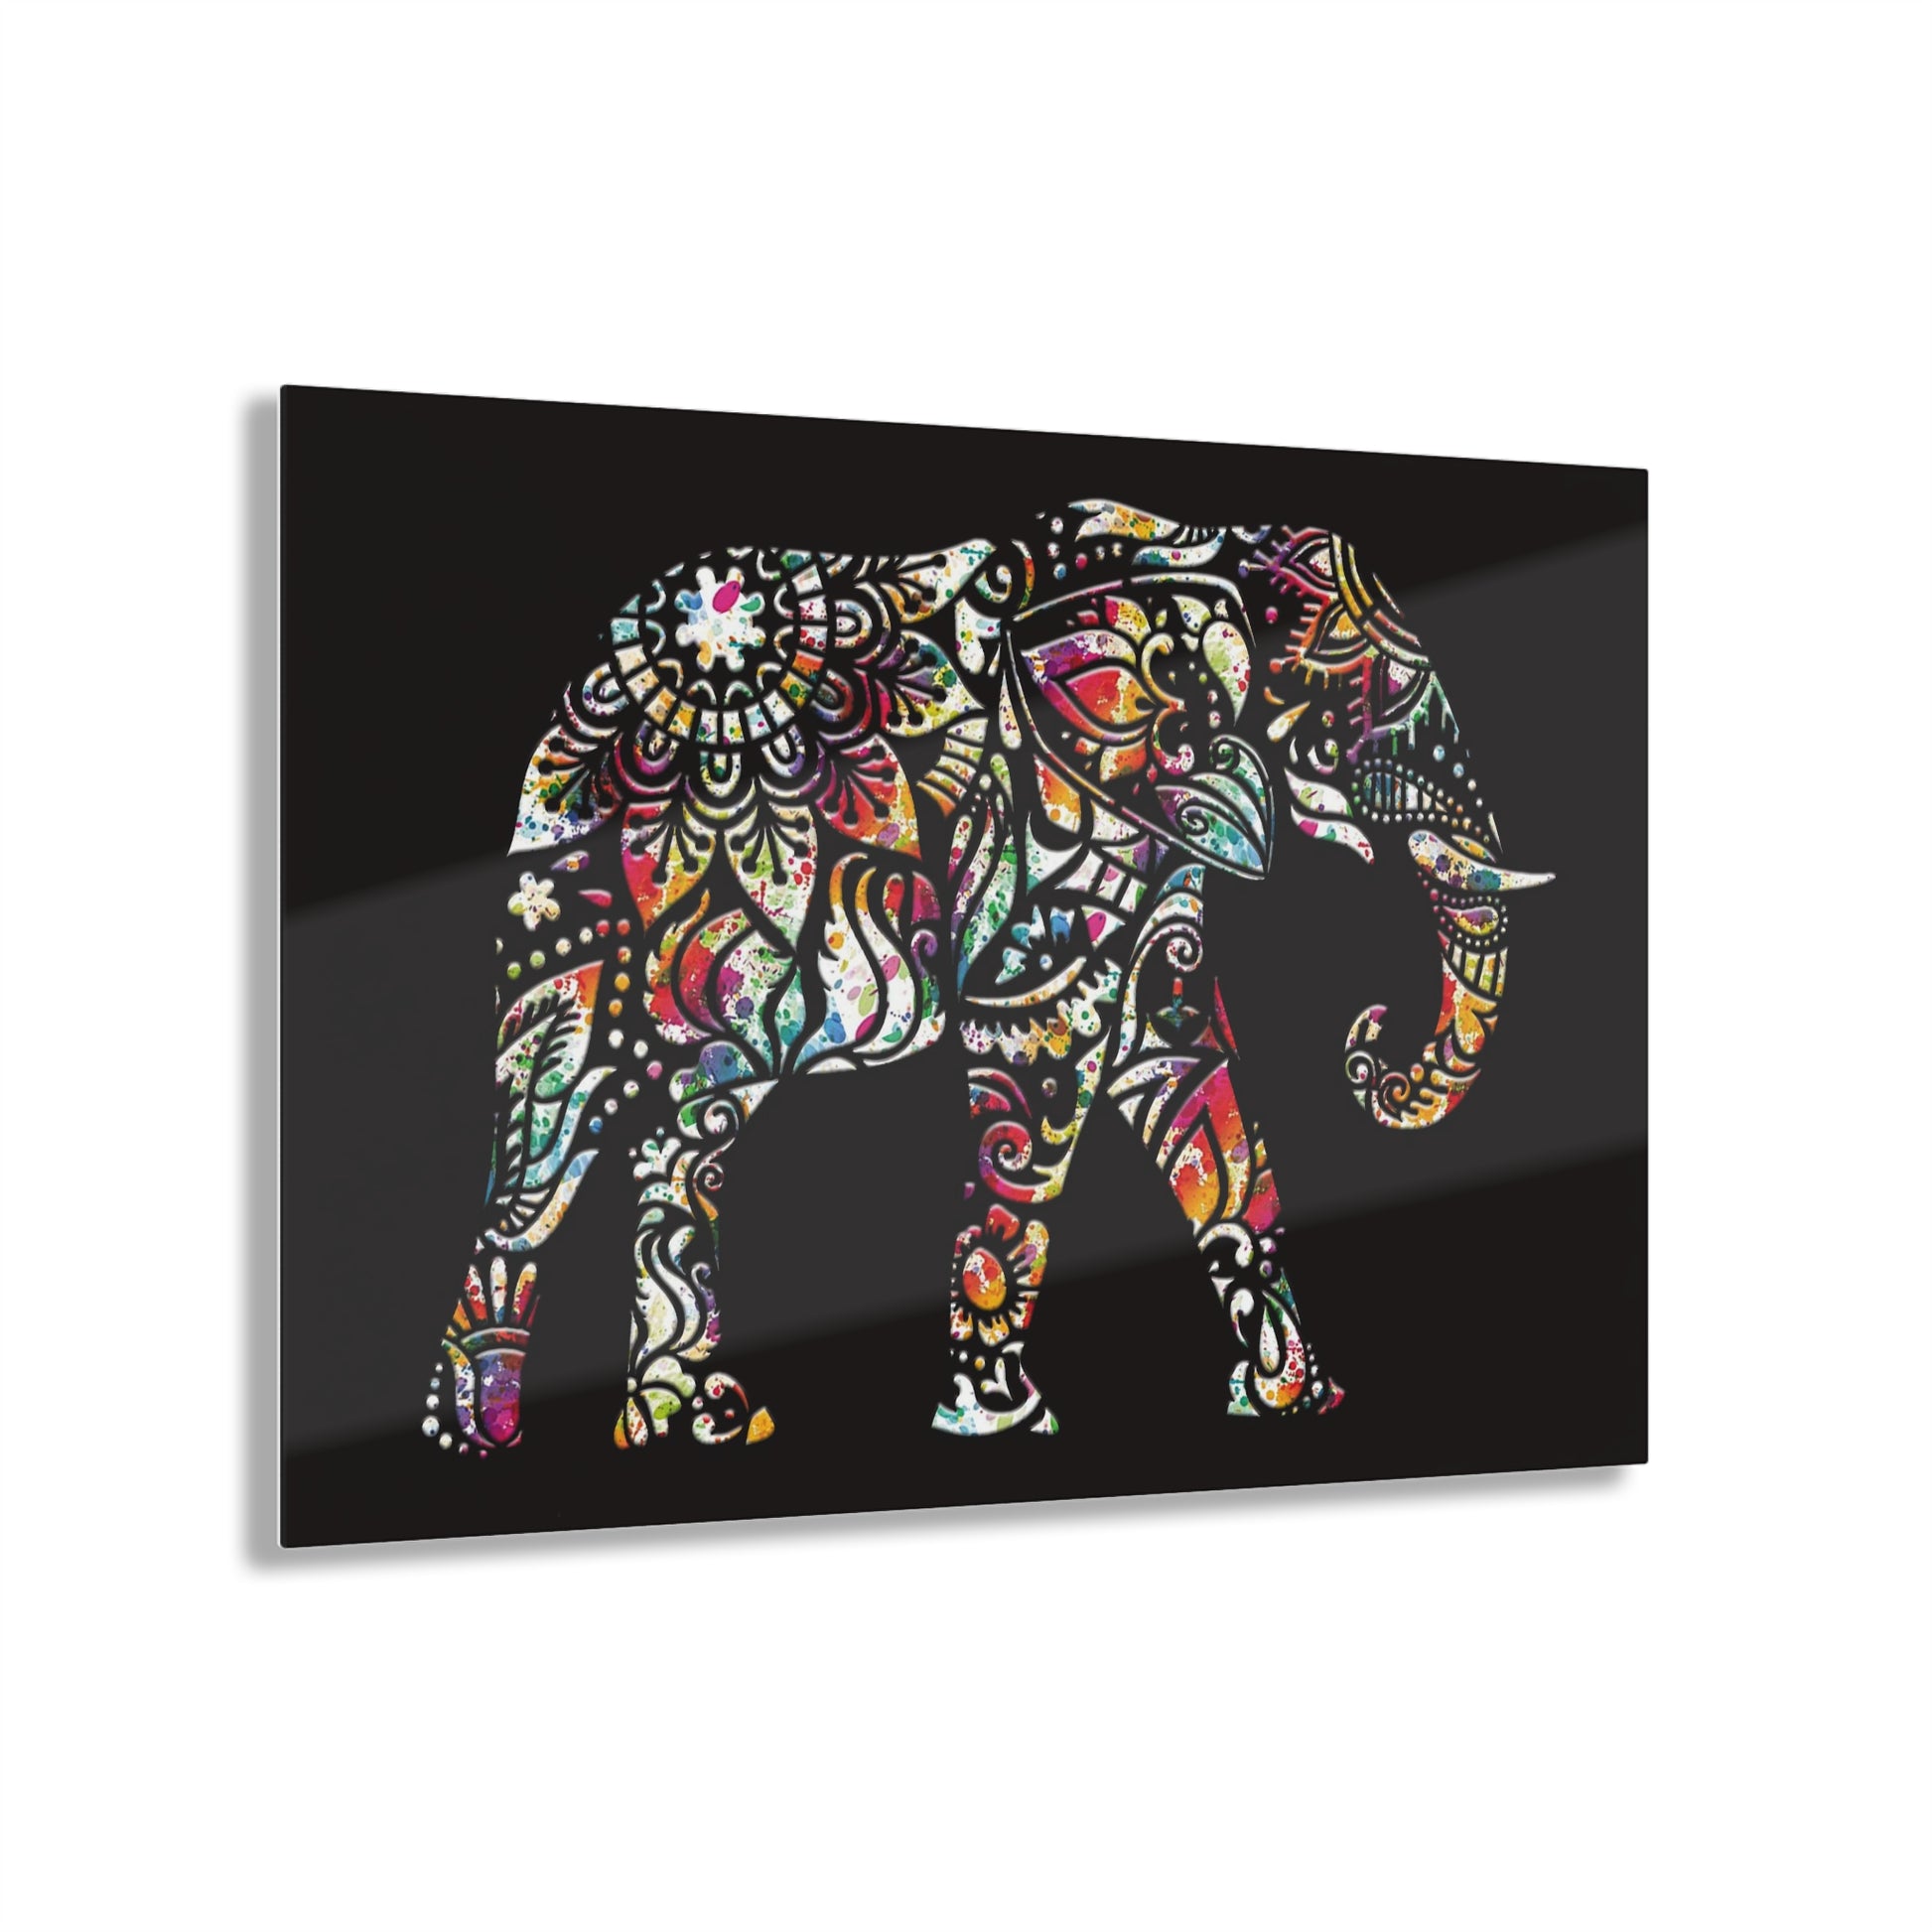 Elephant Themed Wall Art - Multicolor Indian Elephant on Black Background Printed on a Crystal Clear Acrylic Panel 36x24 